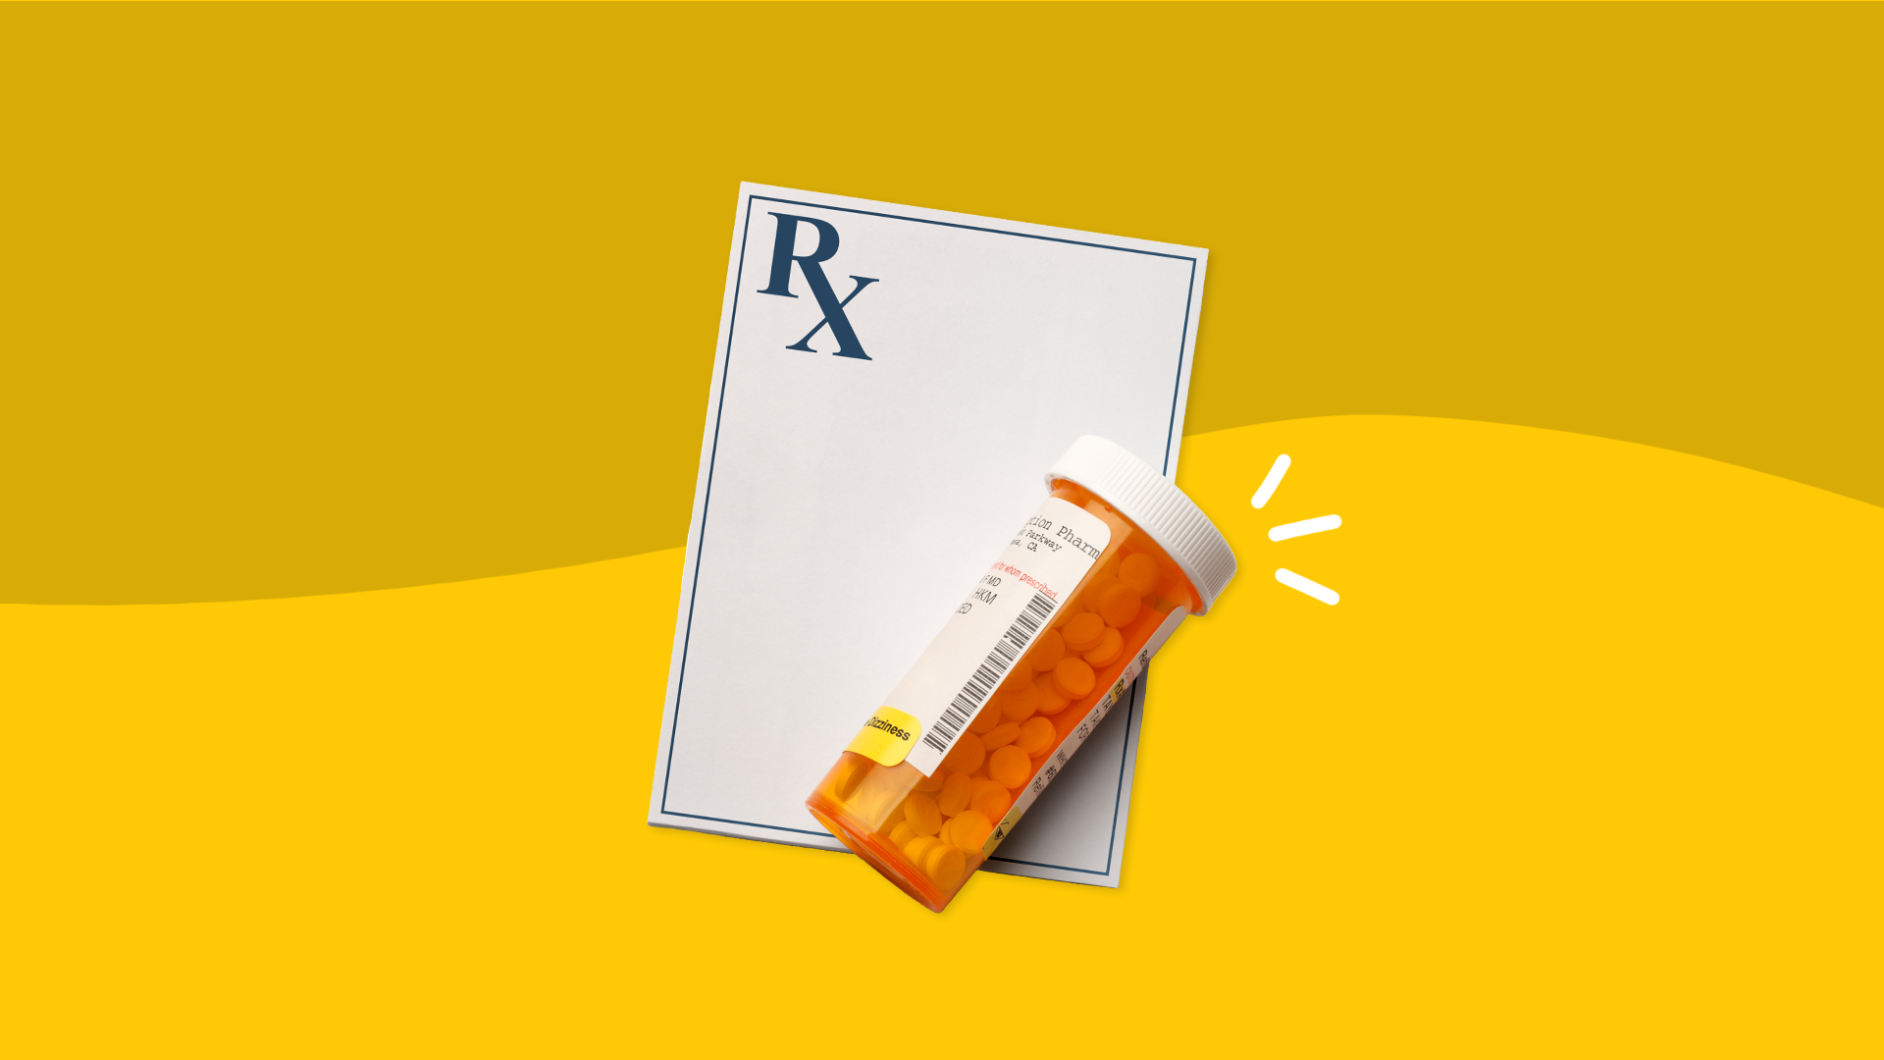 Prescription pad with pill bottle: Cialis side effects, warning and interactions